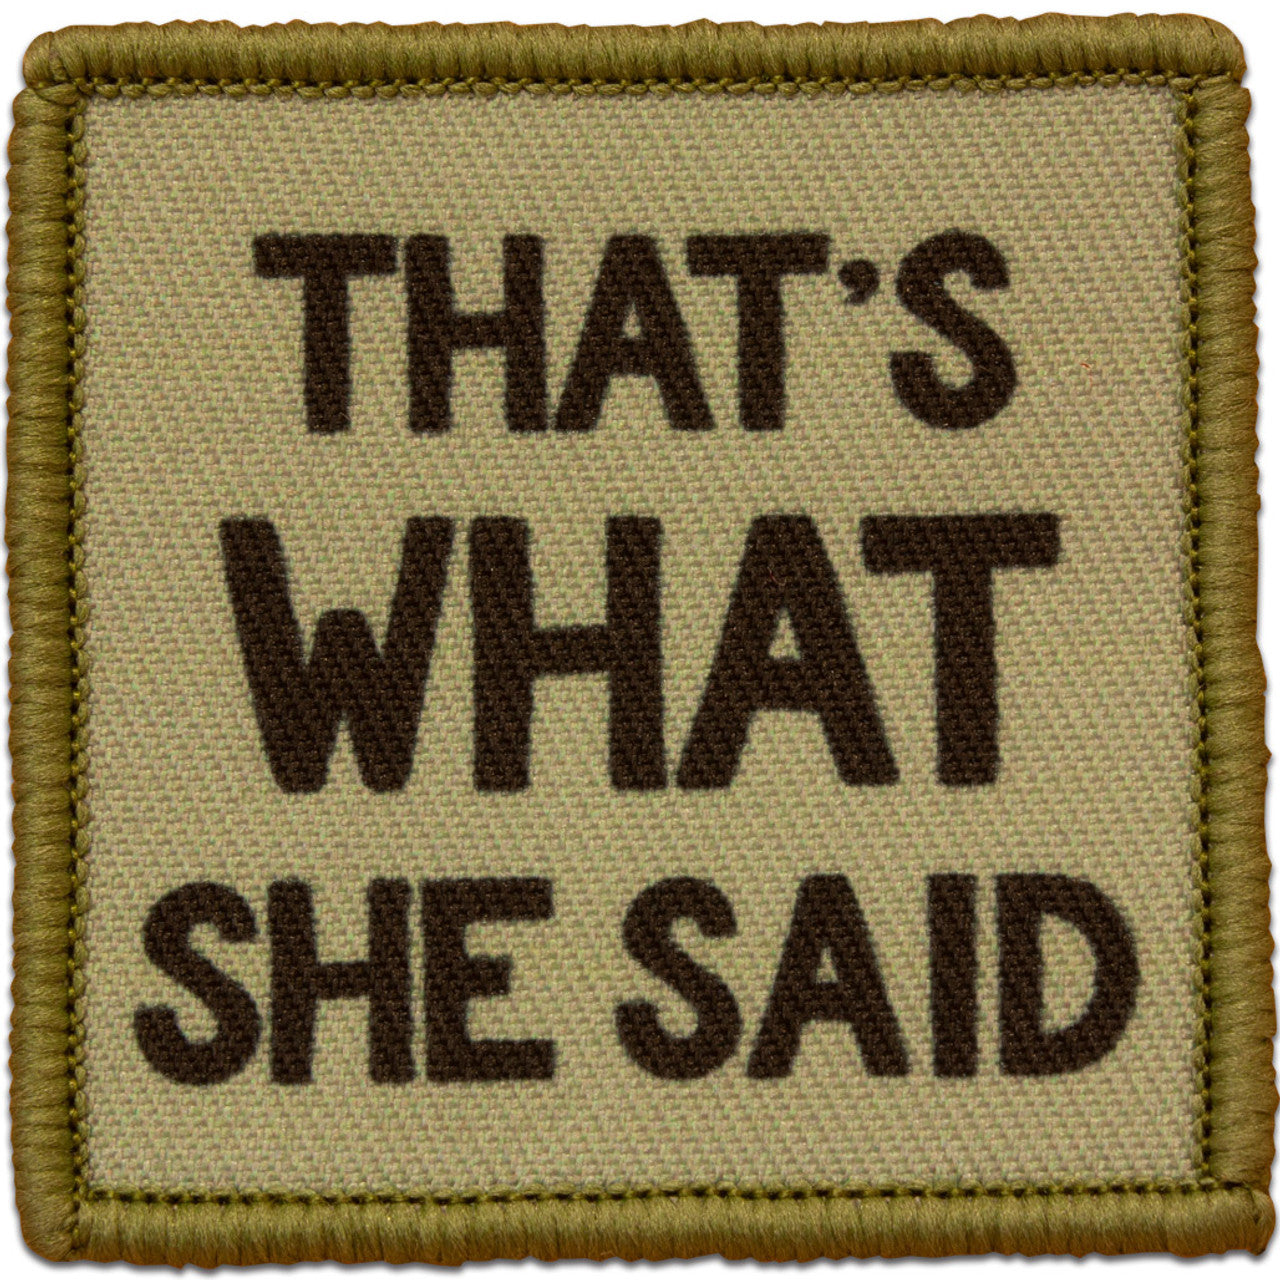 "THAT'S WHAT SHE SAID" MORALE PATCH